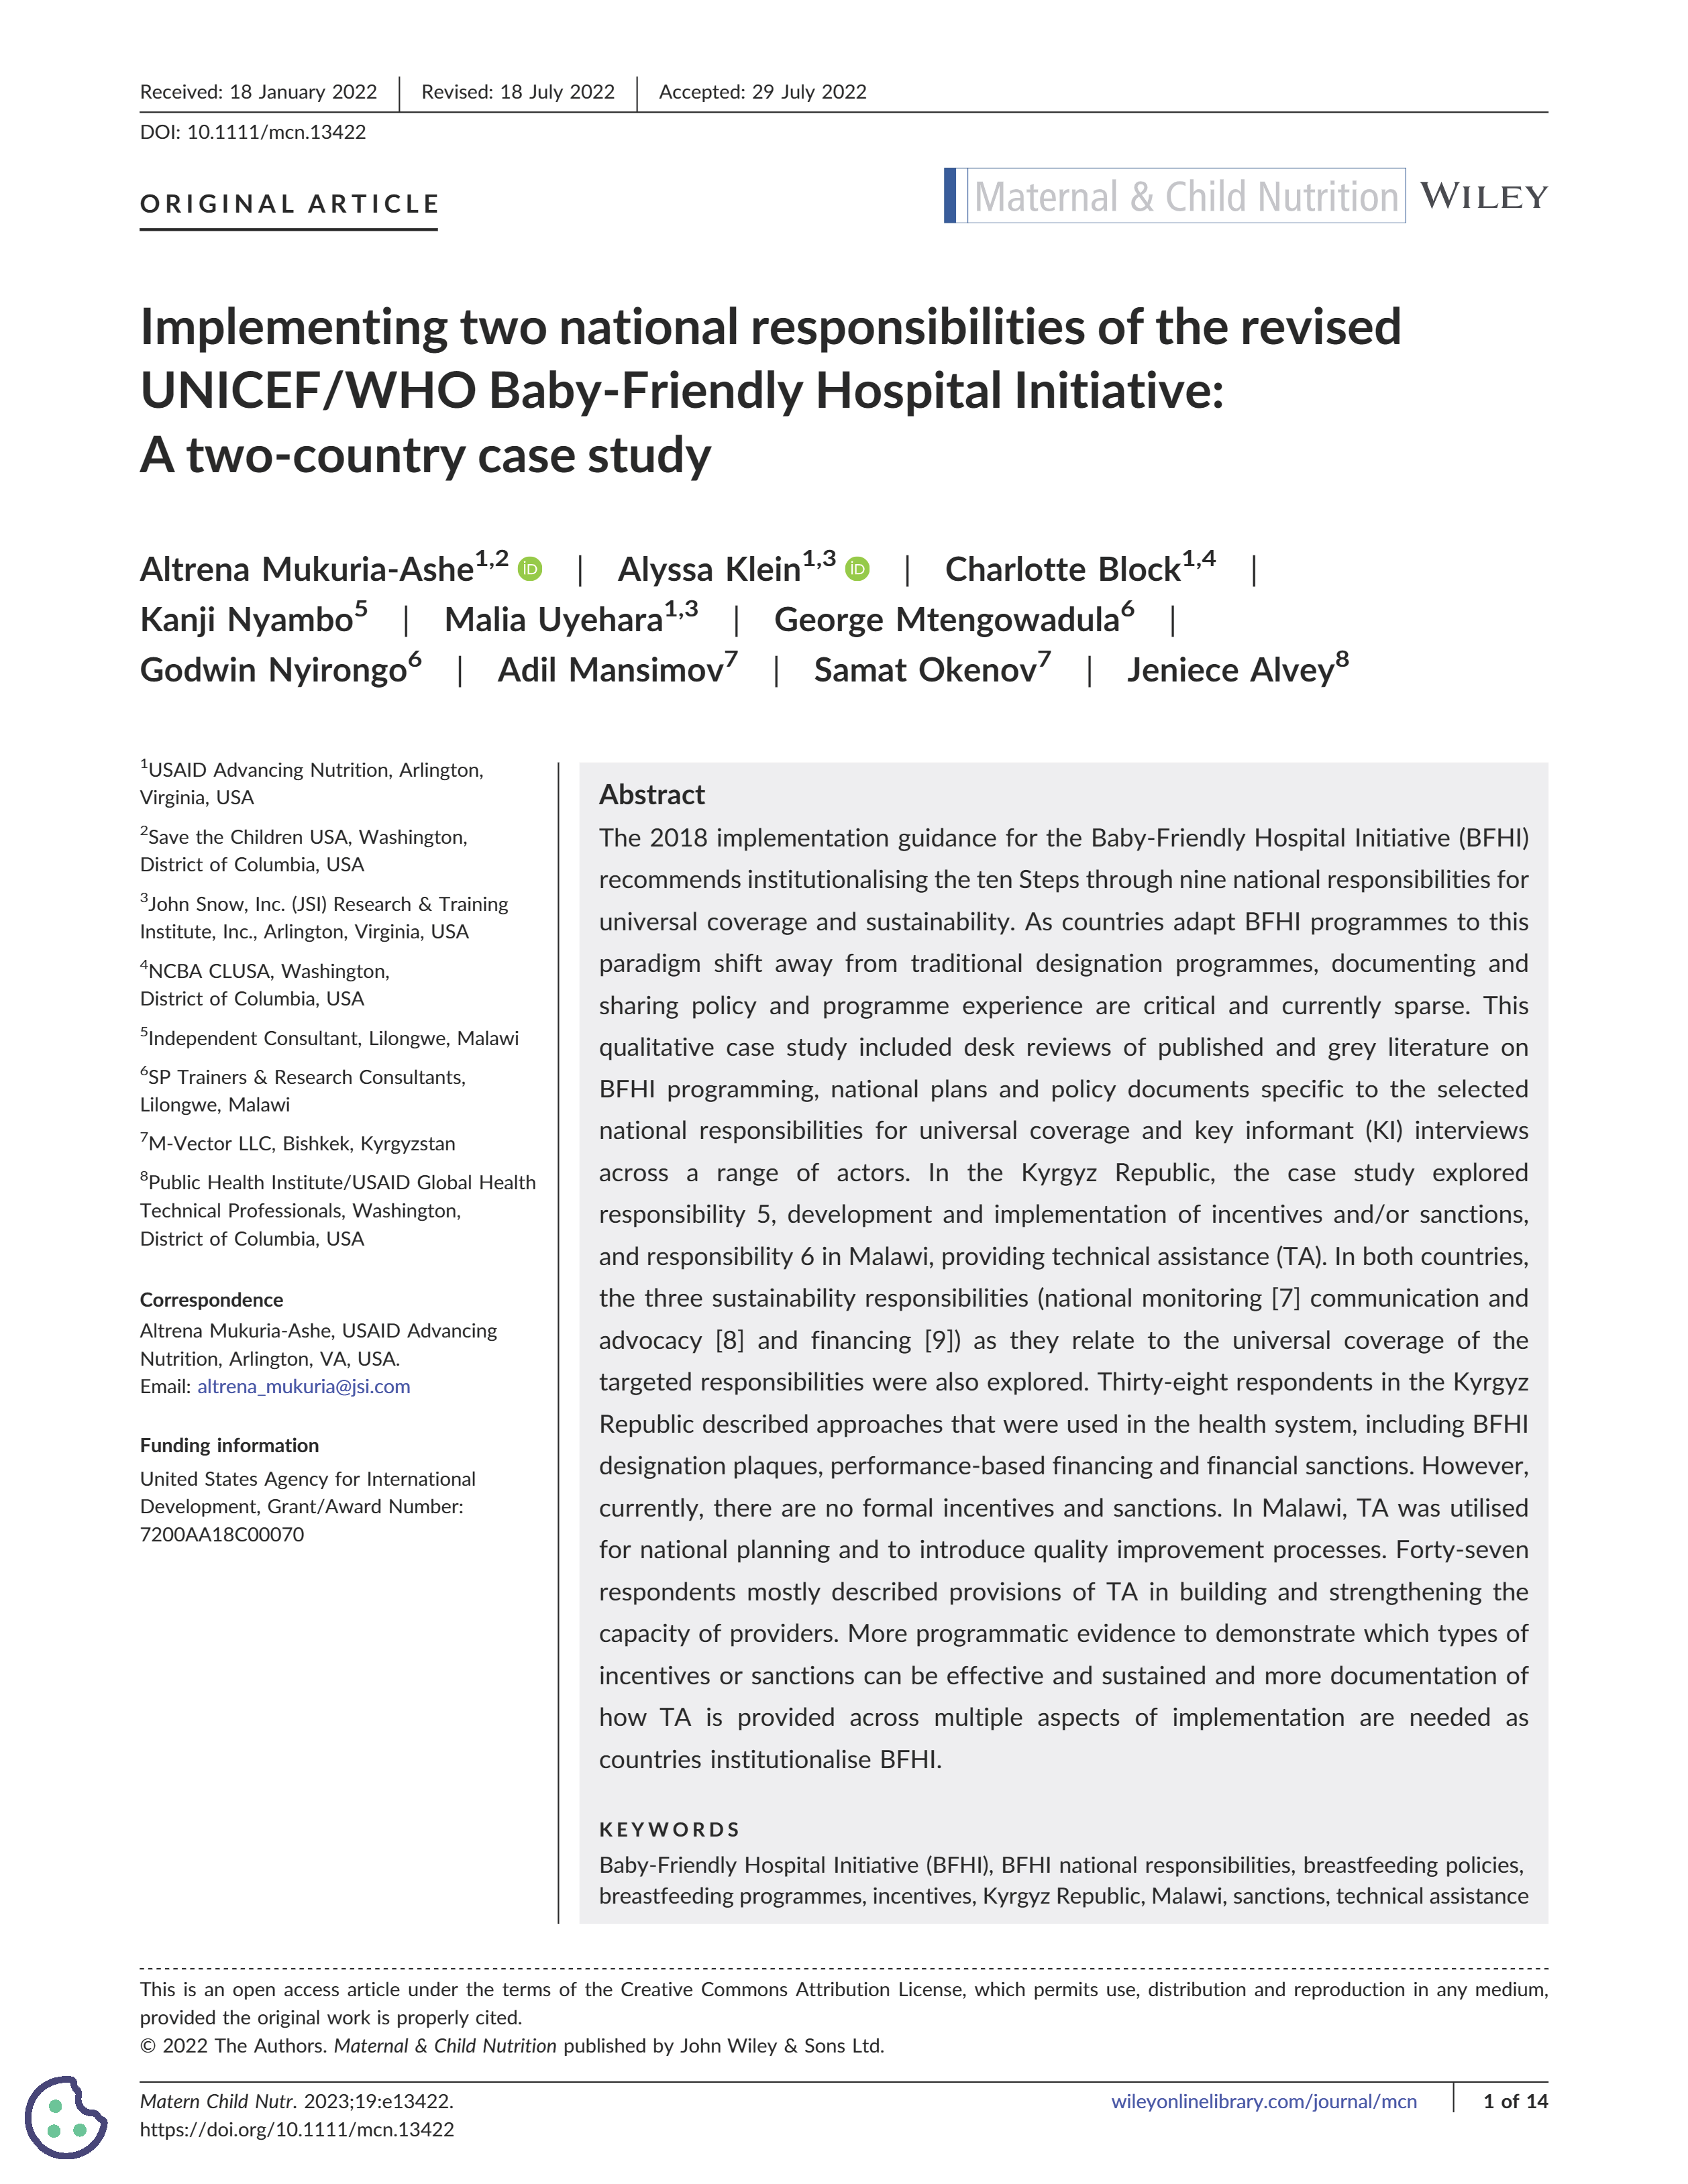 Cover page for Implementing Two National Responsibilities of the Revised UNICEF/WHO Baby‐Friendly Hospital Initiative: A Two‐Country Case Study